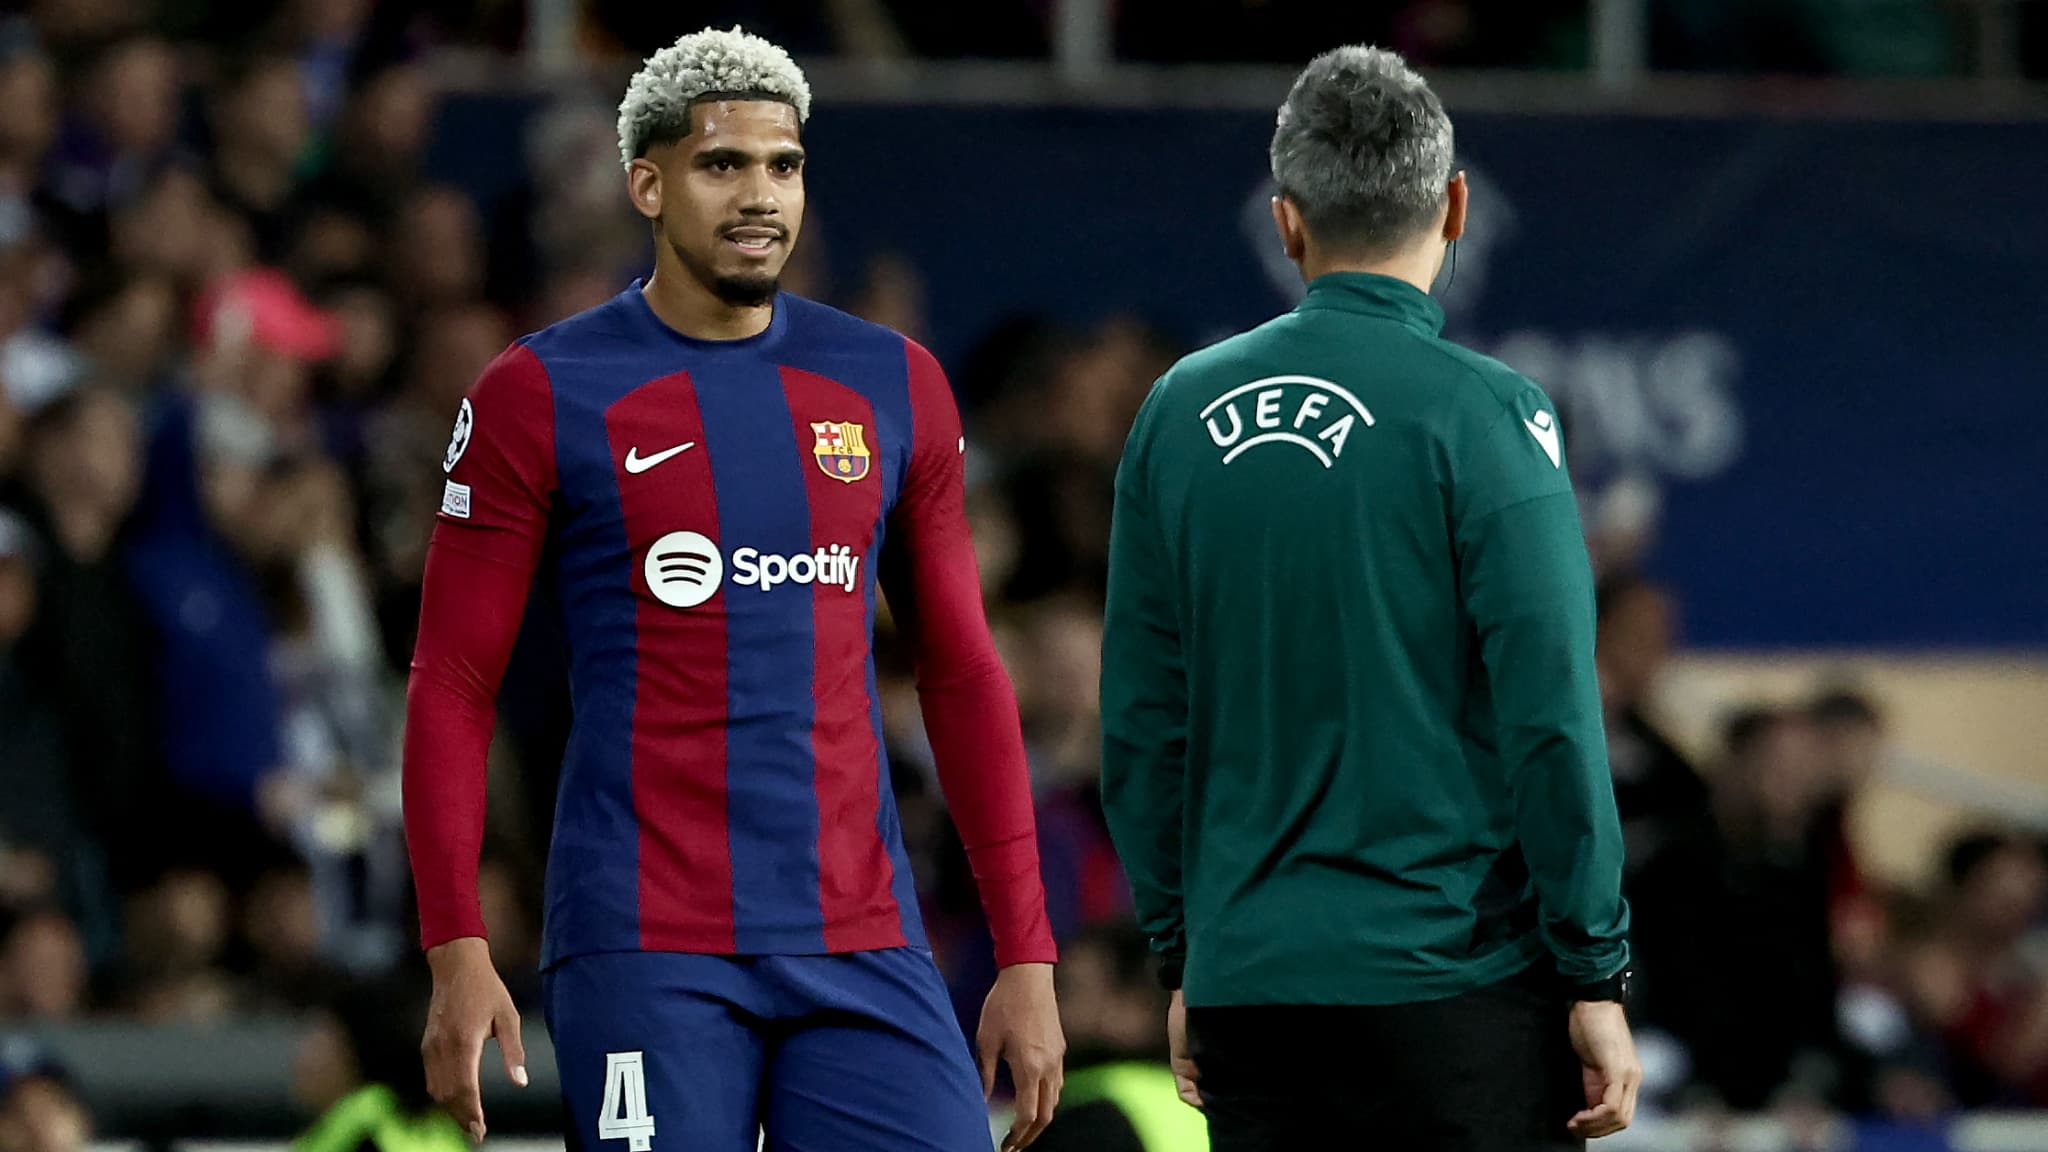 Tension in the Barça wardrobe after PSG?  Araujo’s icy response to teammate Gündogan’s criticism